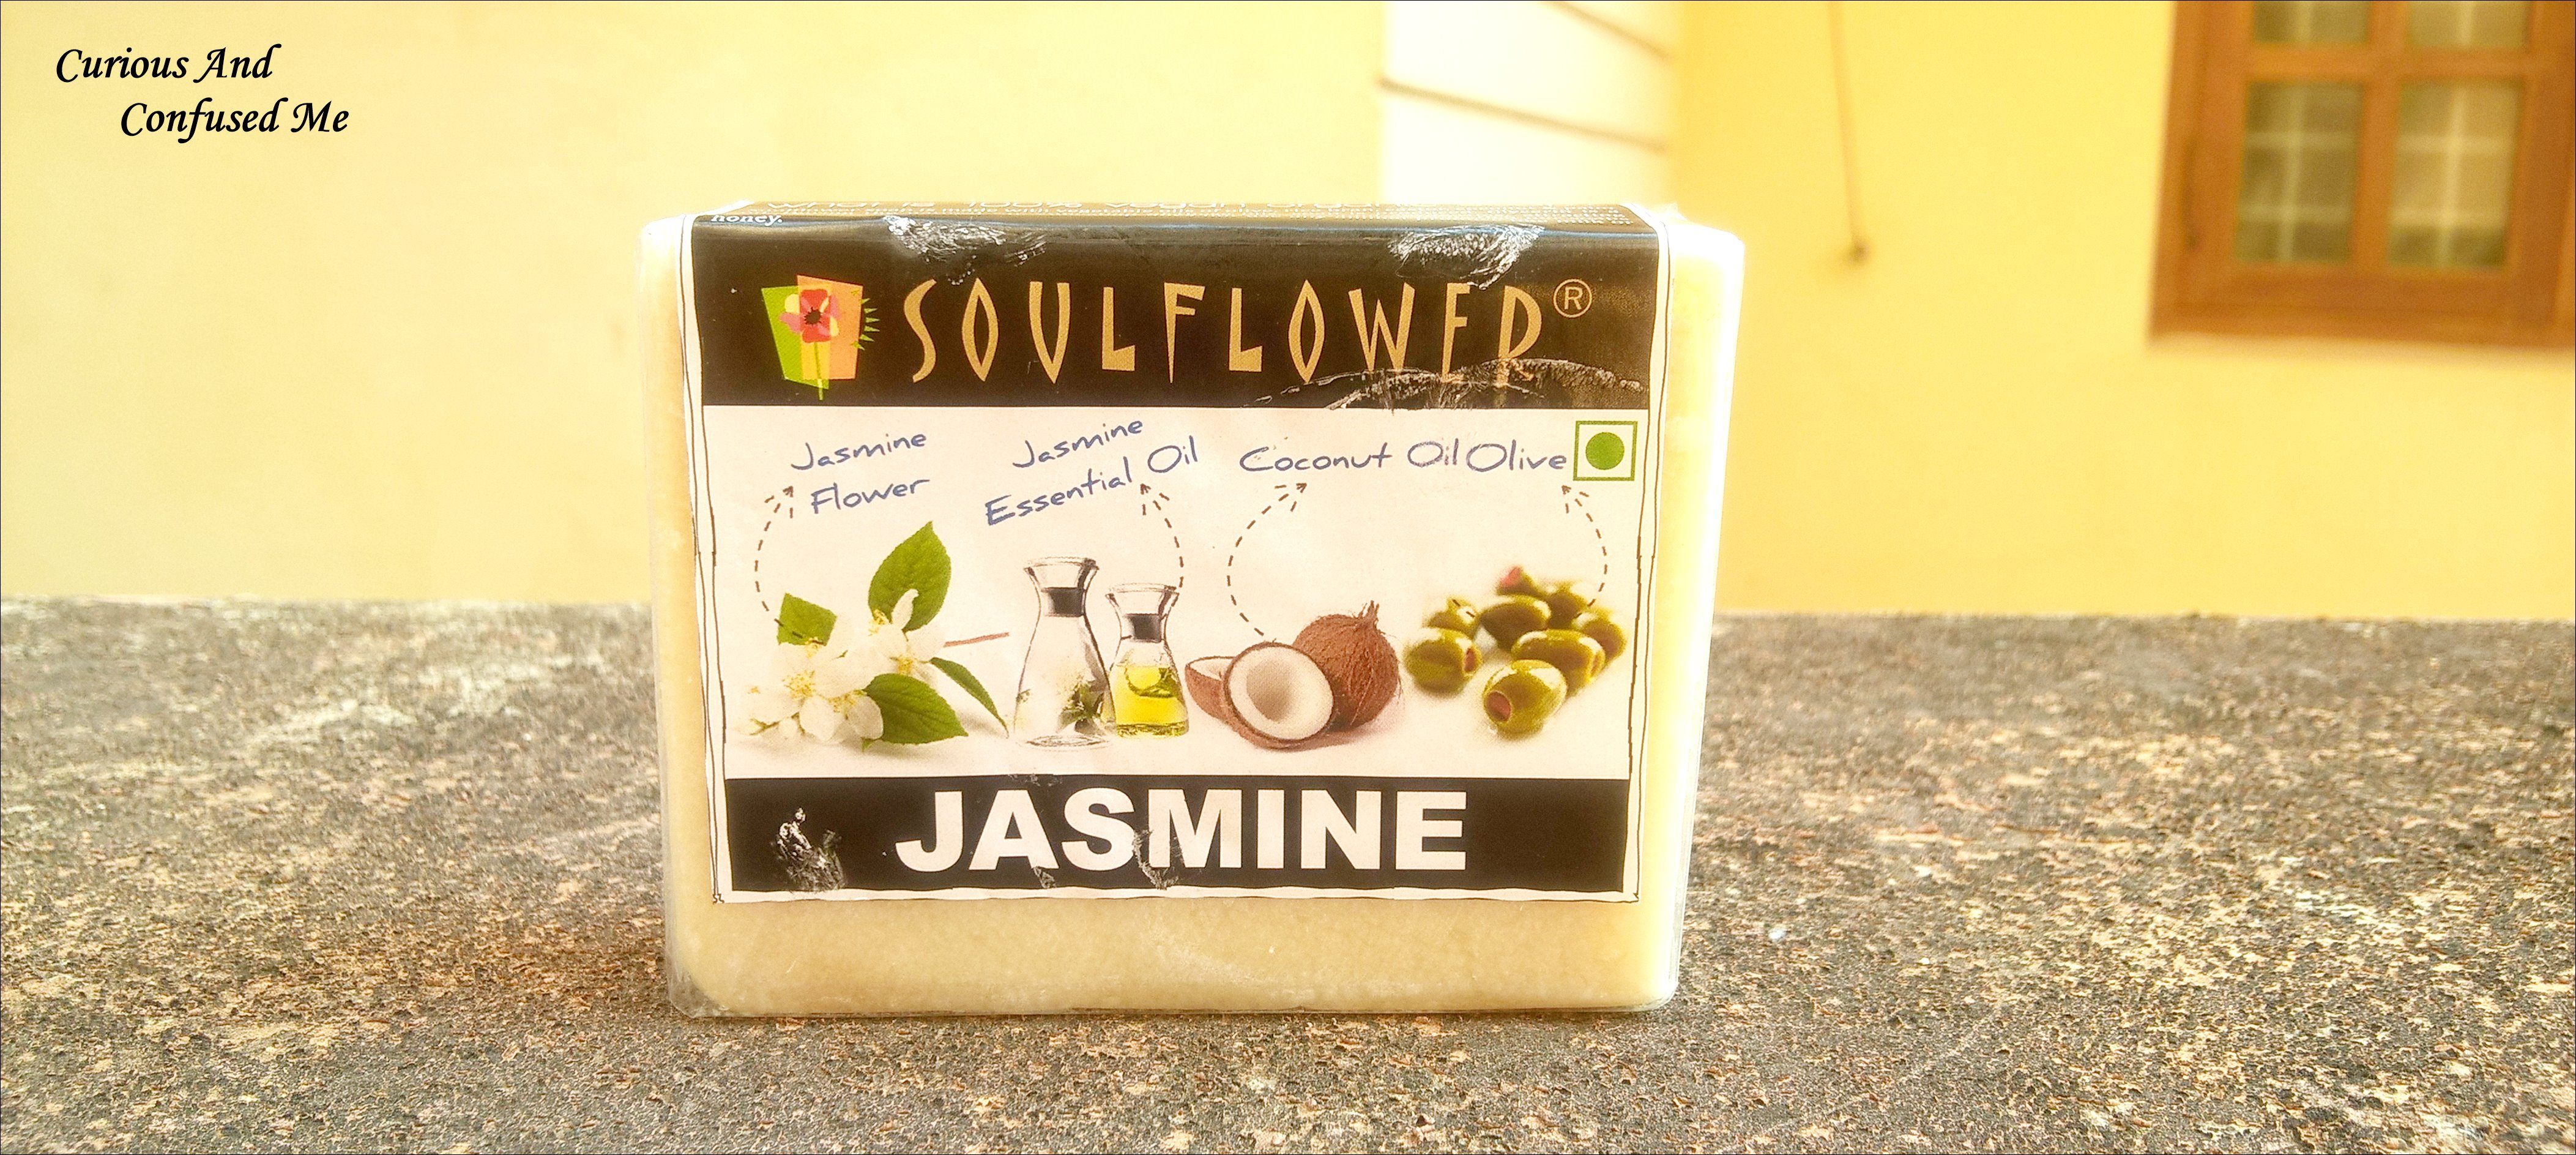 Soulflower Jasmine Soap : Review